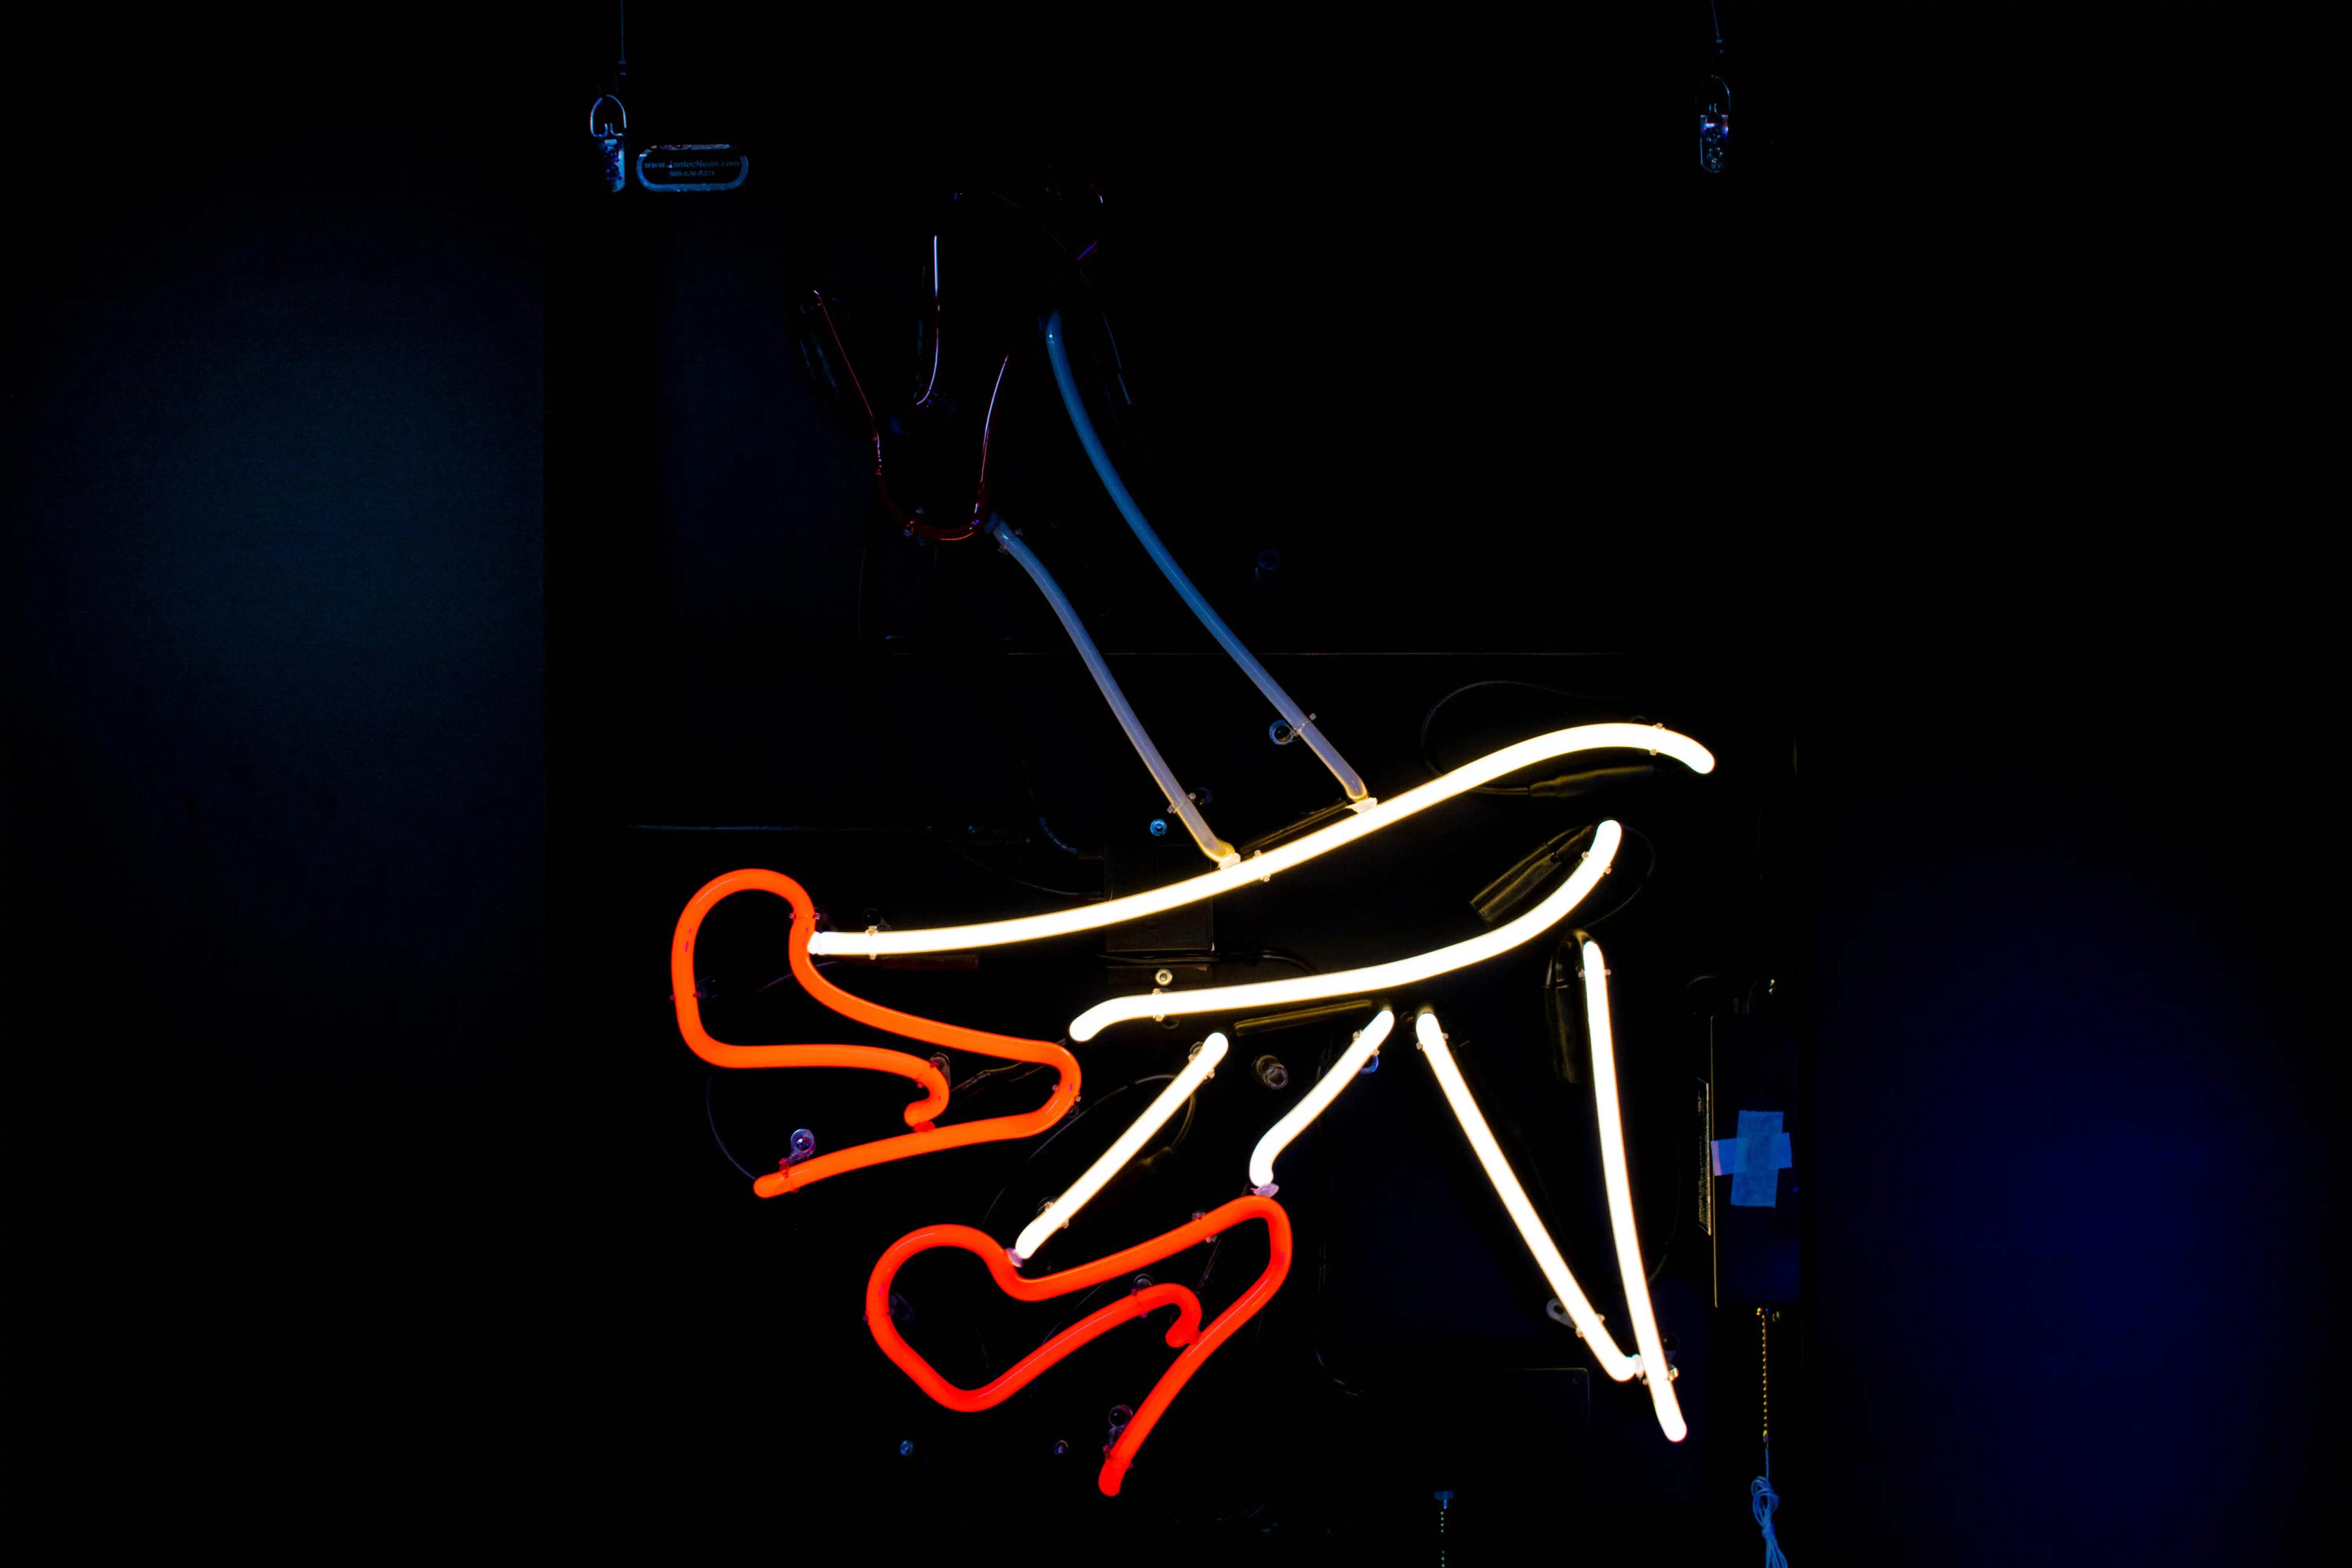 a neon sign showing a woman's legs kicking with red heels on.